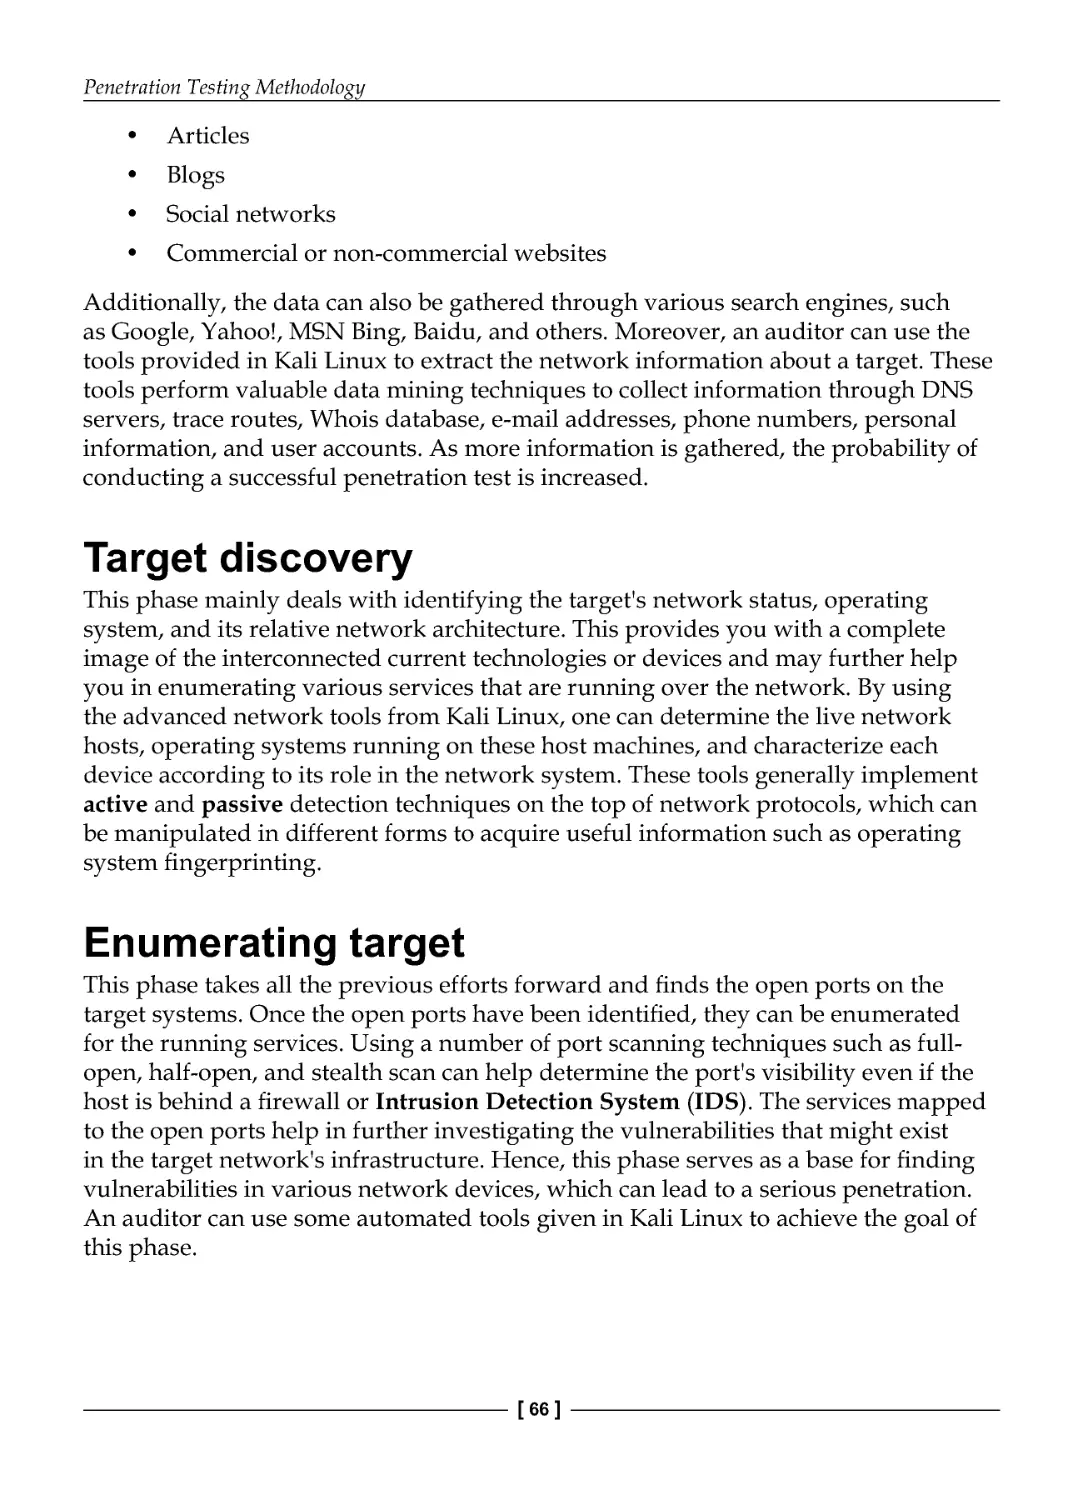 Target discovery
Enumerating target